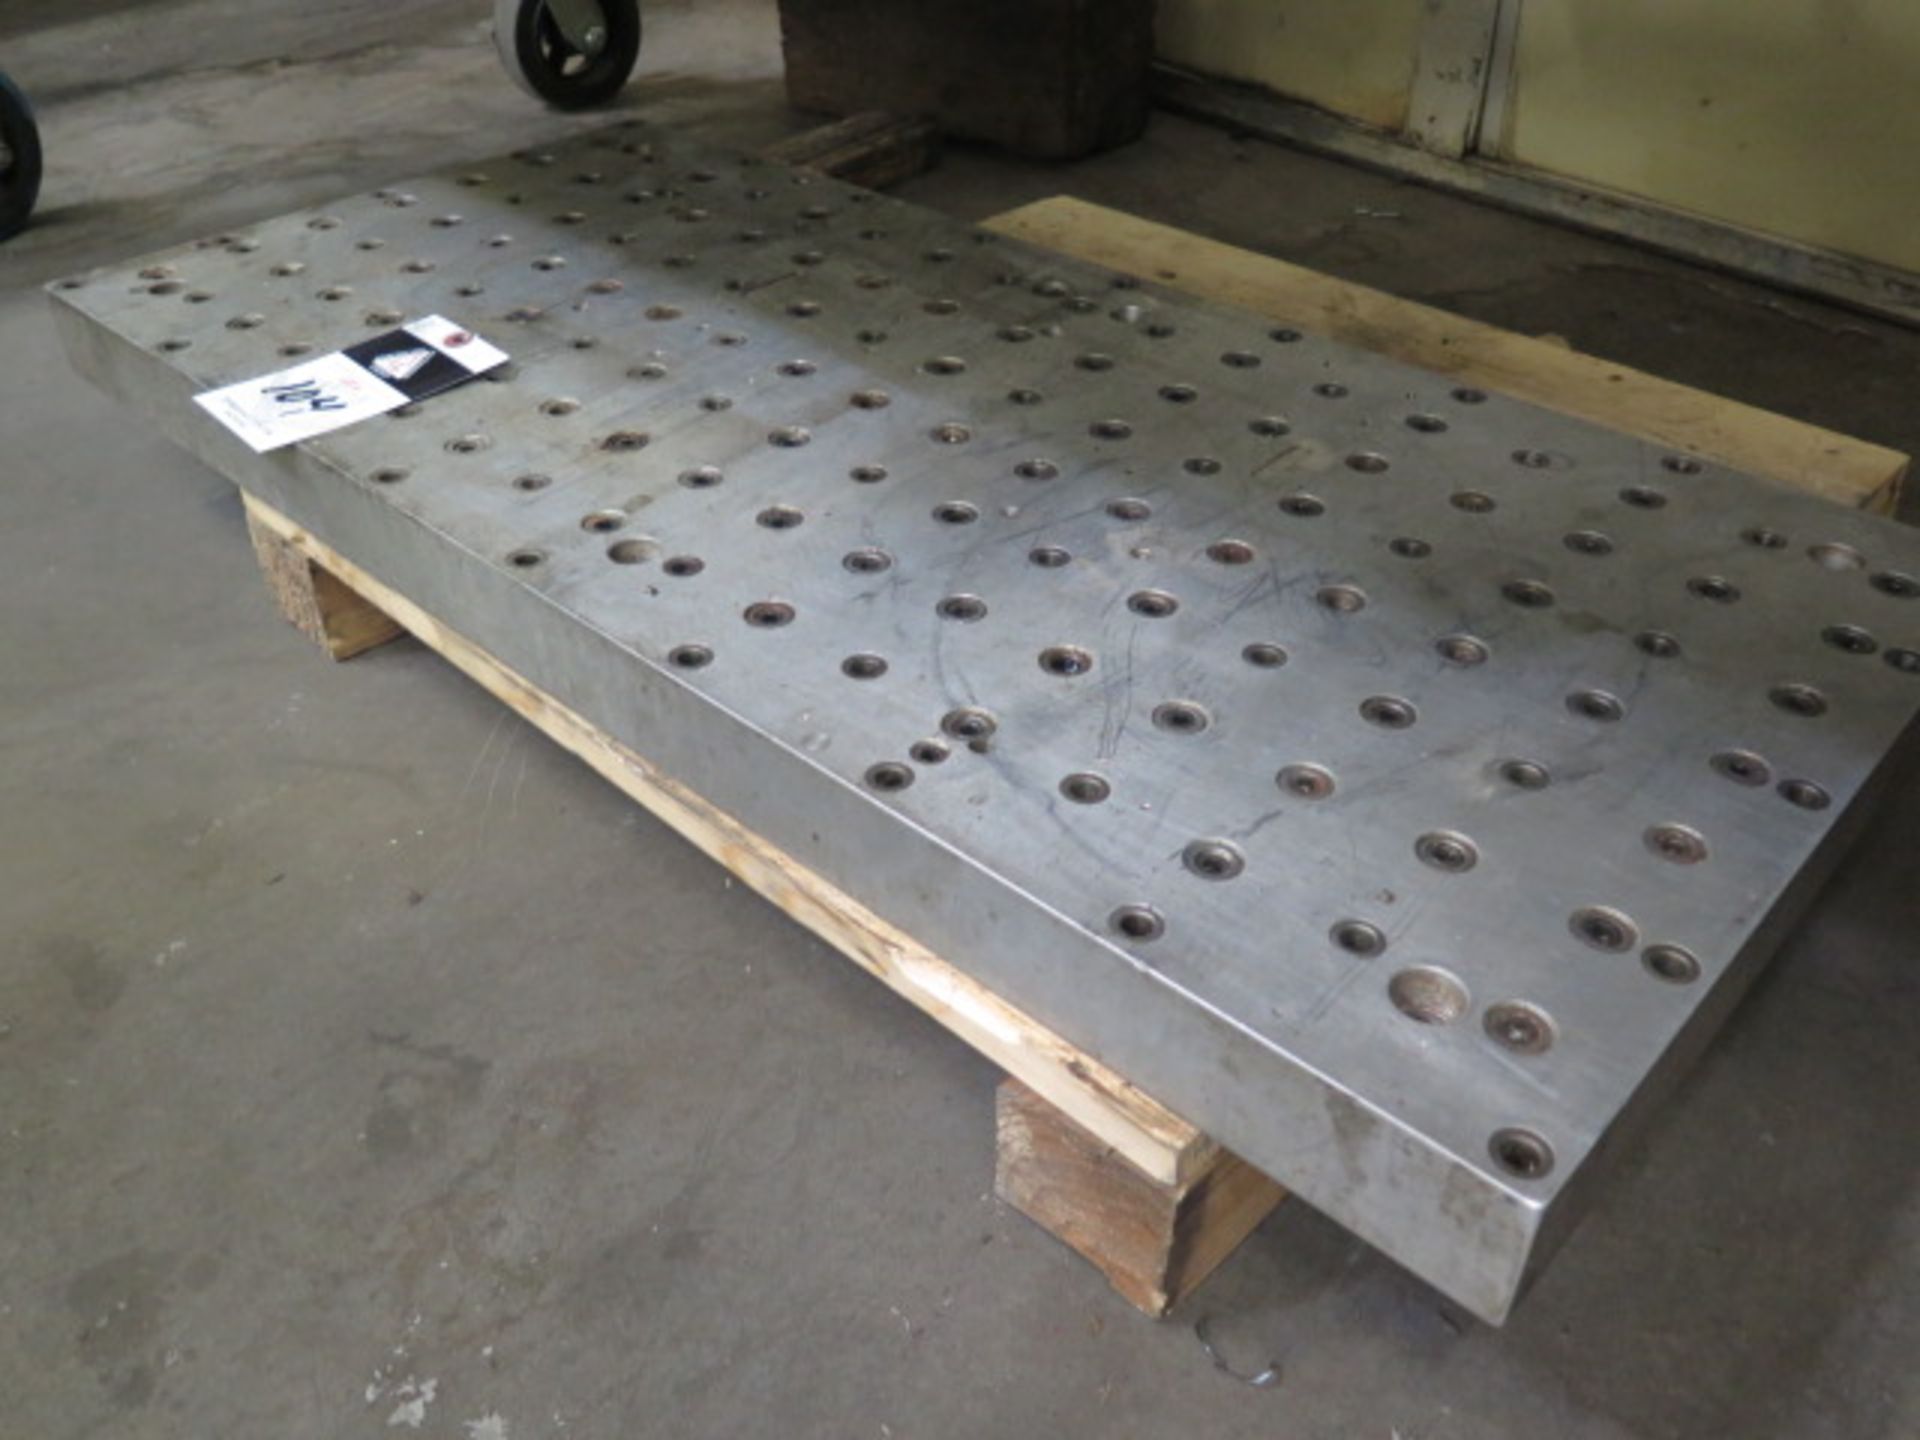 16" x 34 1/2" Tapped Hole Aluminum Top Plate (SOLD AS-IS - NO WARRANTY) - Image 2 of 3